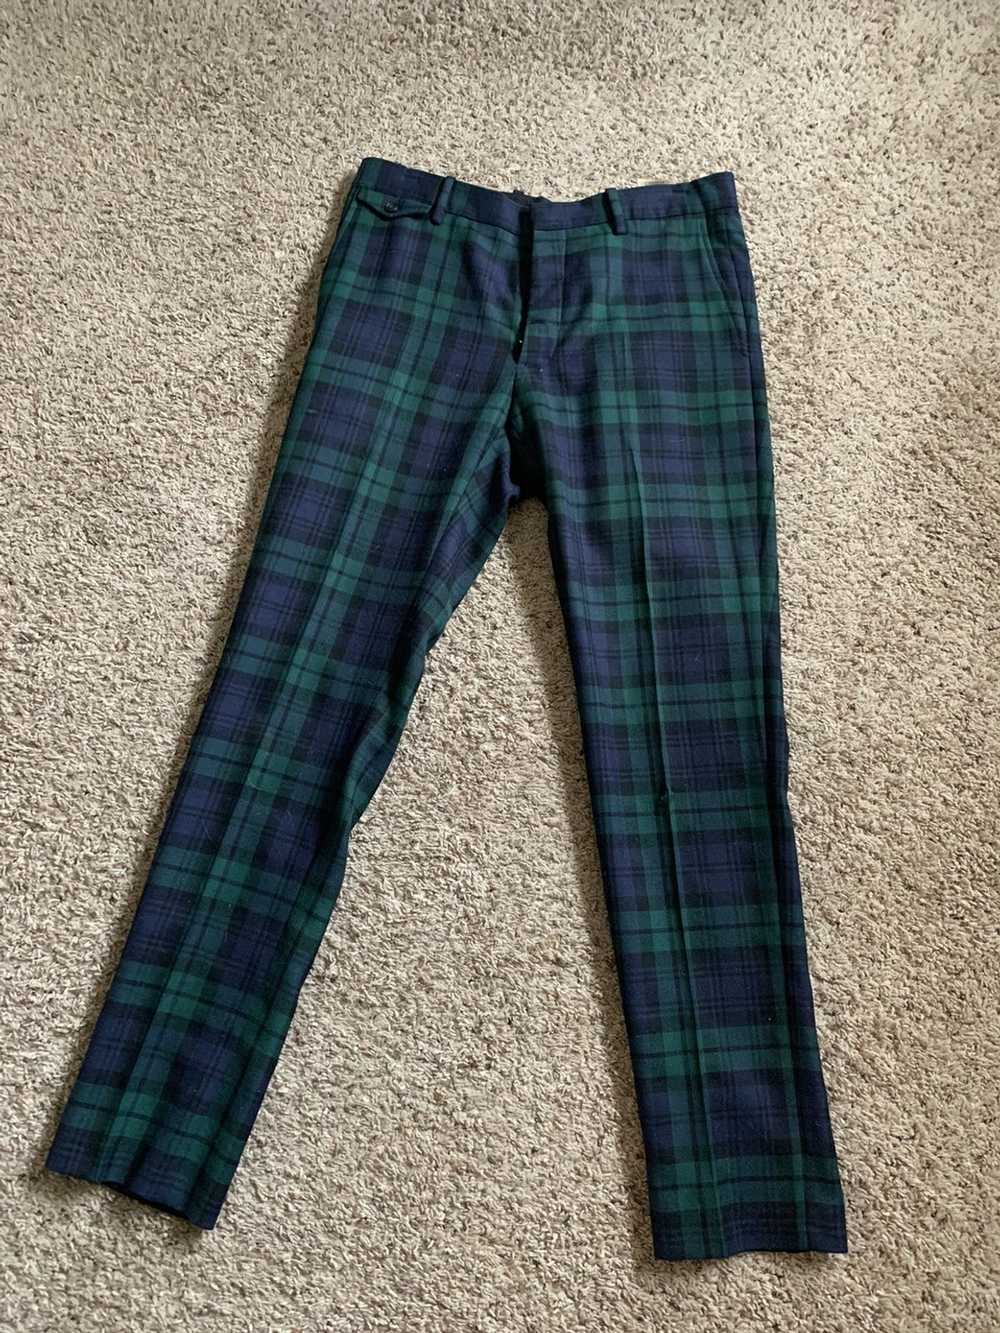 Burberry Burberry Checkered Wool Pants - image 2